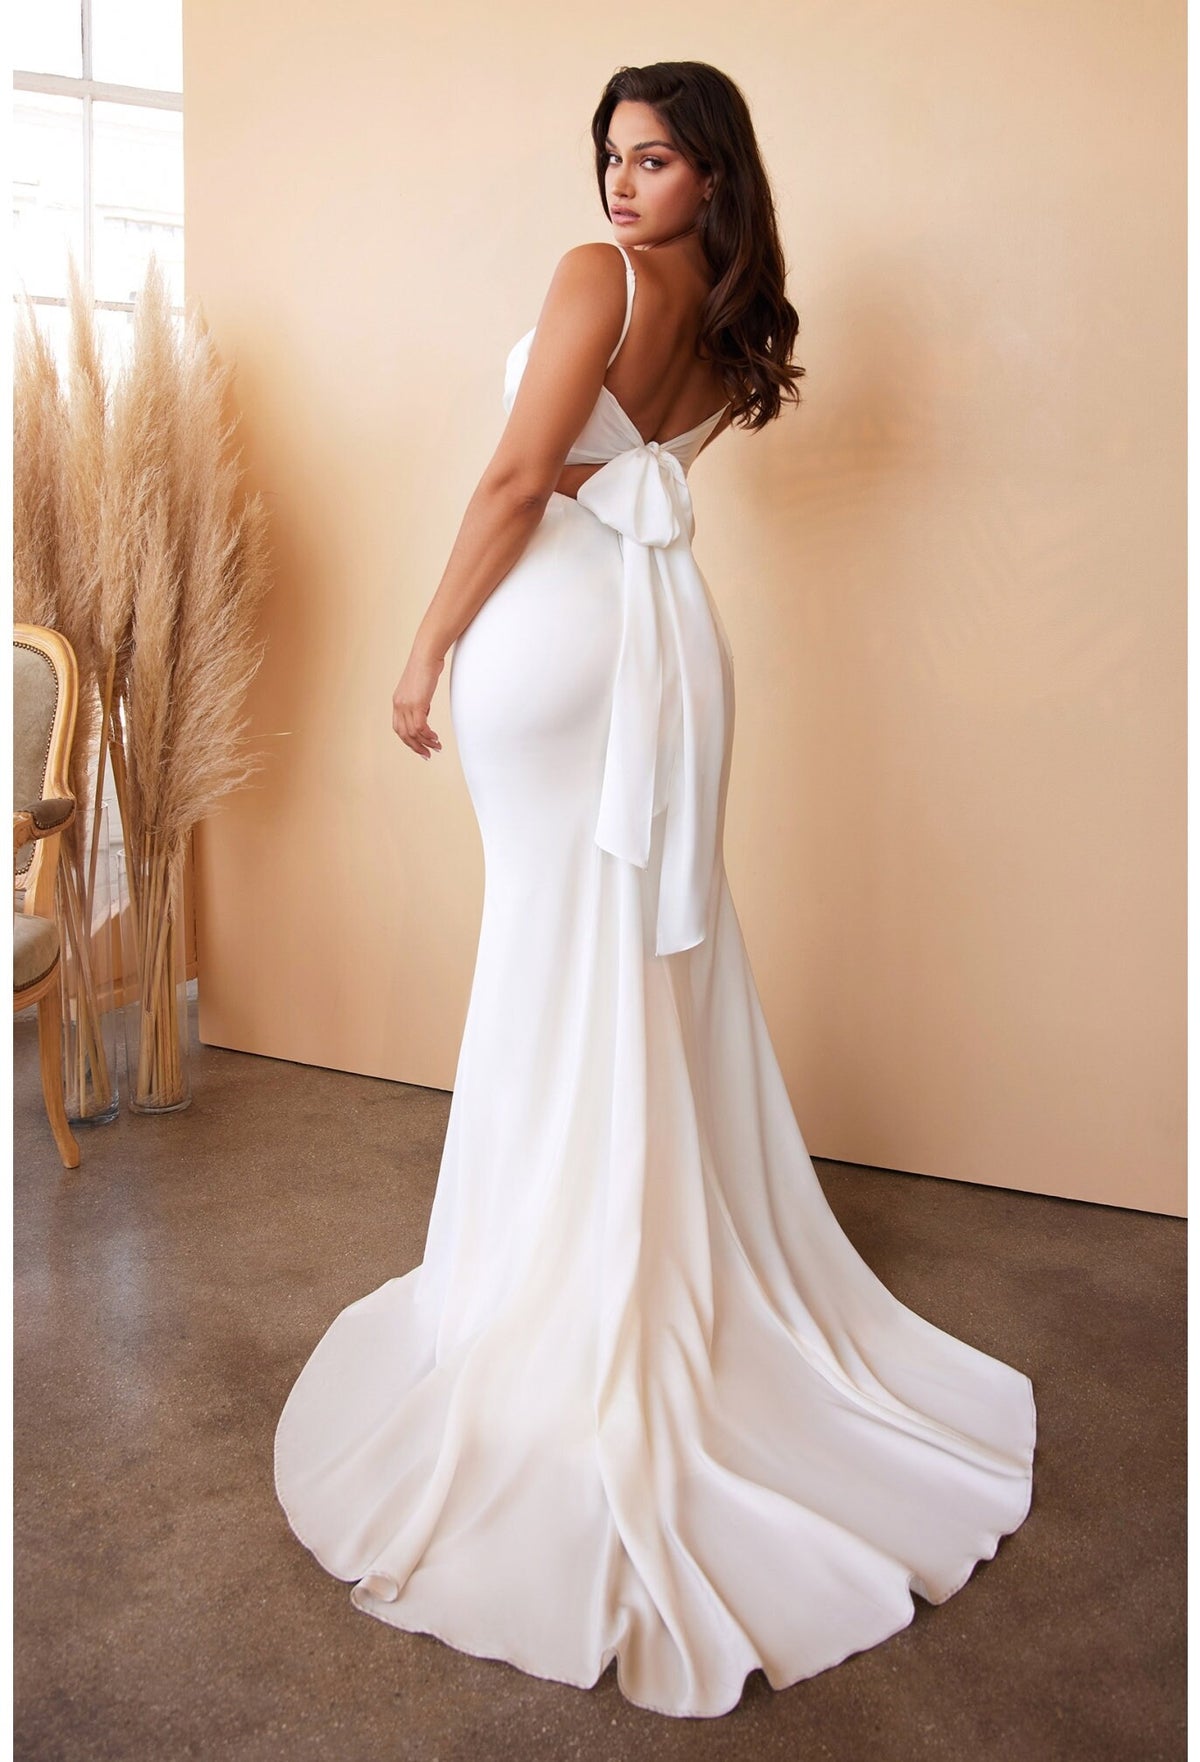 Cowl Satin Wedding Dress Bridal Gown with Tieing Open Bow Back Sleeveless with Straps and Train Off White Color